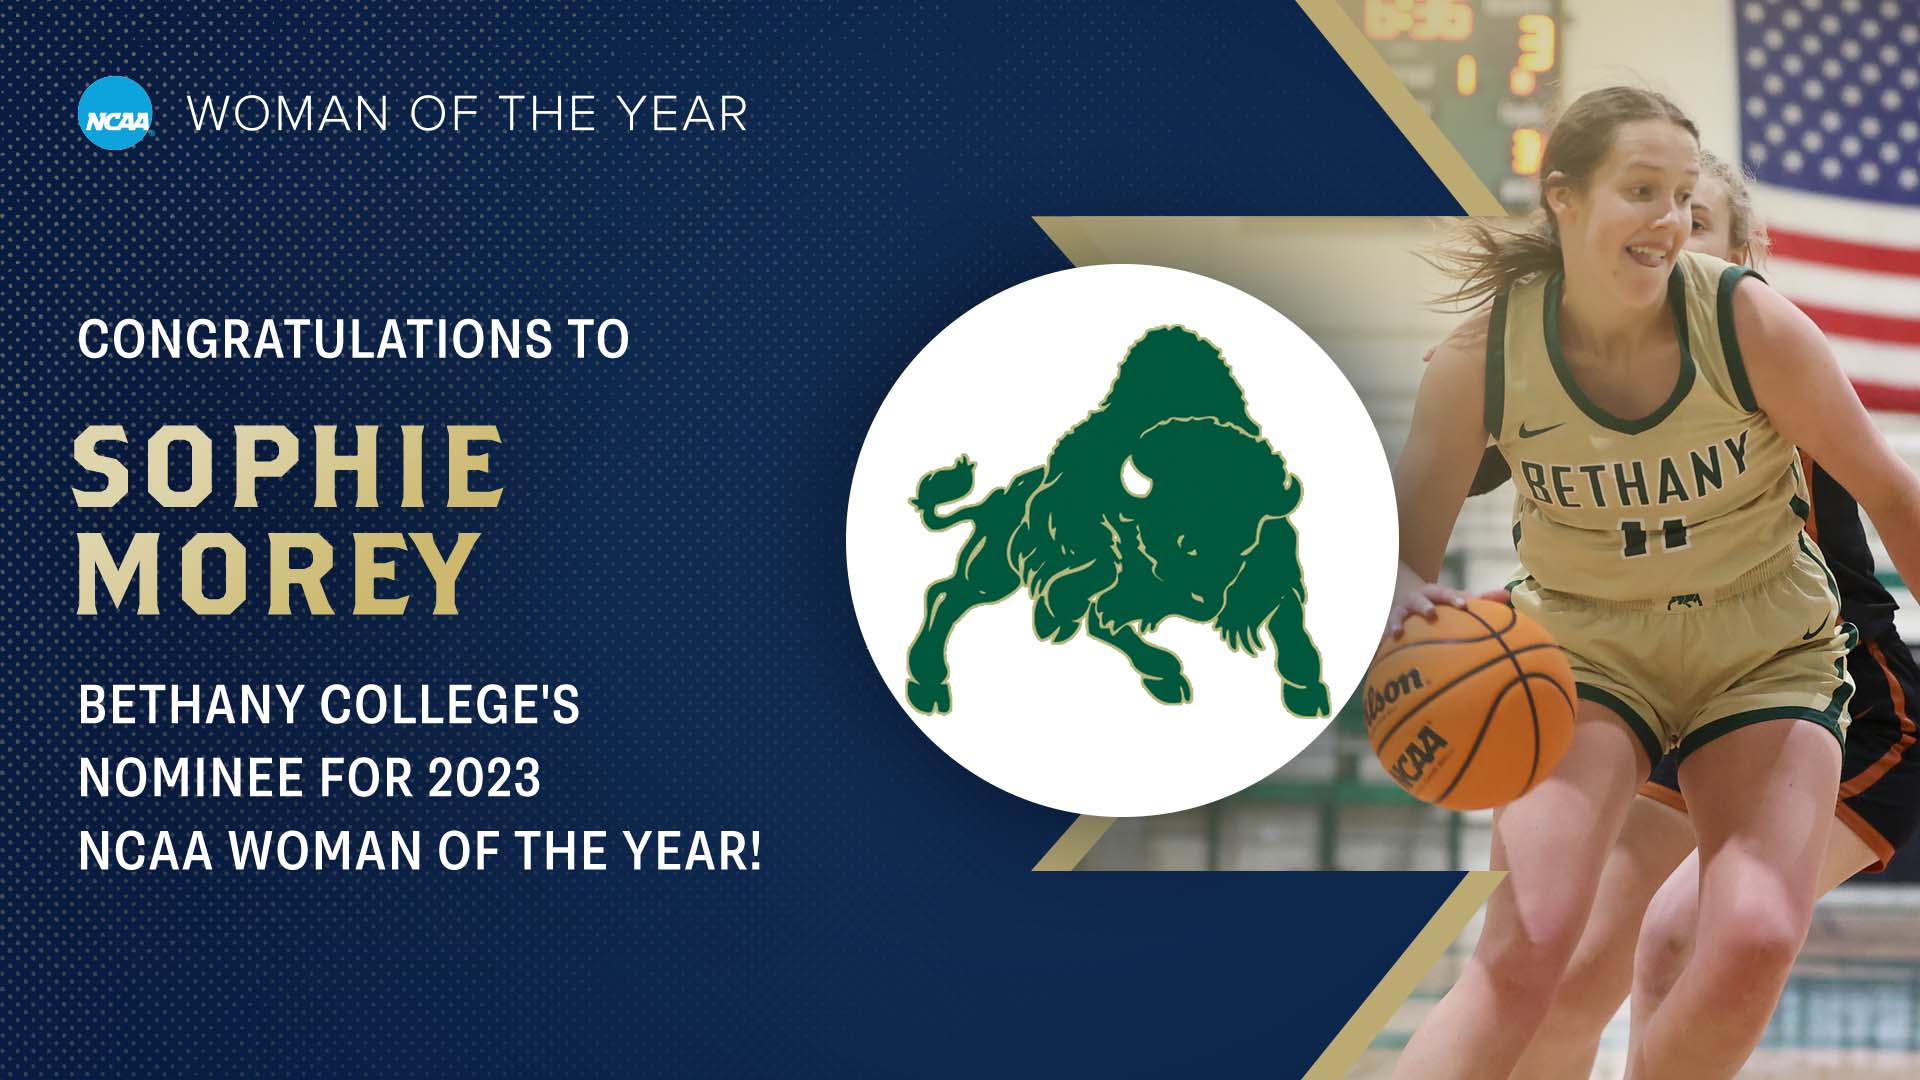 Women's Basketball: Morey Nominated by PAC for 2023 NCAA Woman of the Year